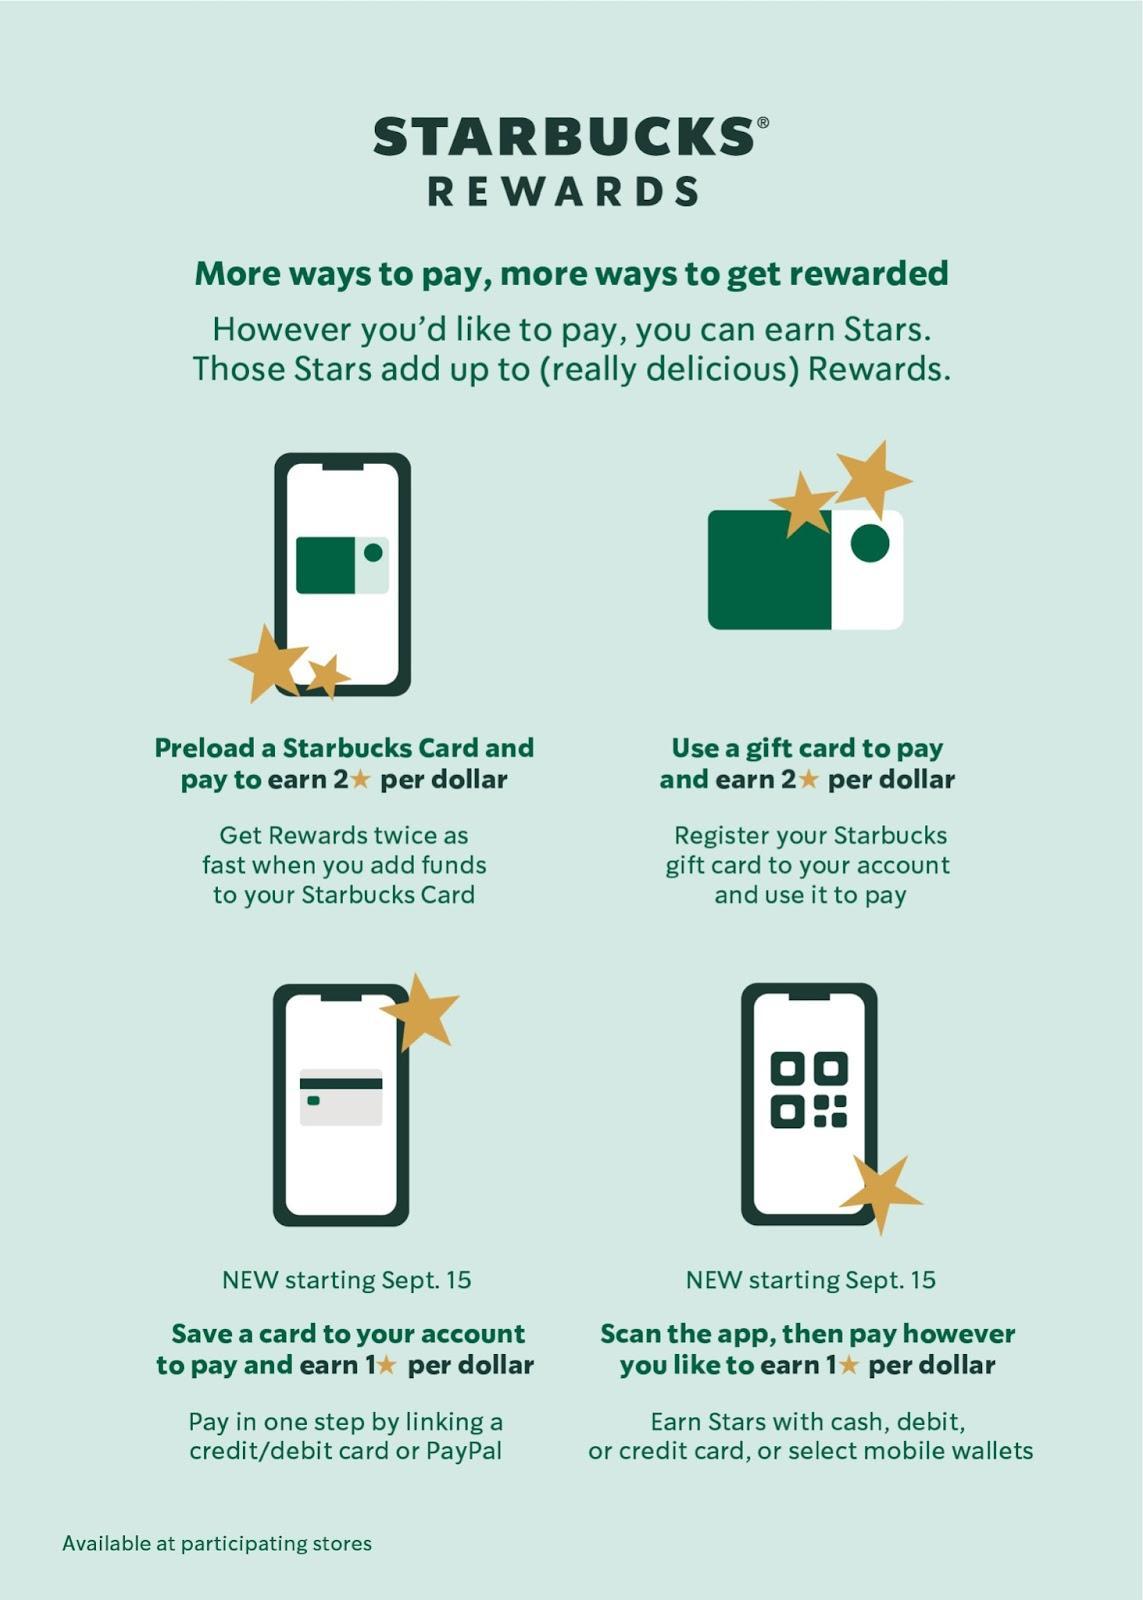 Information on Starbucks rewards such as how to earn stars, how to reload your card and what you can get with your stars. 